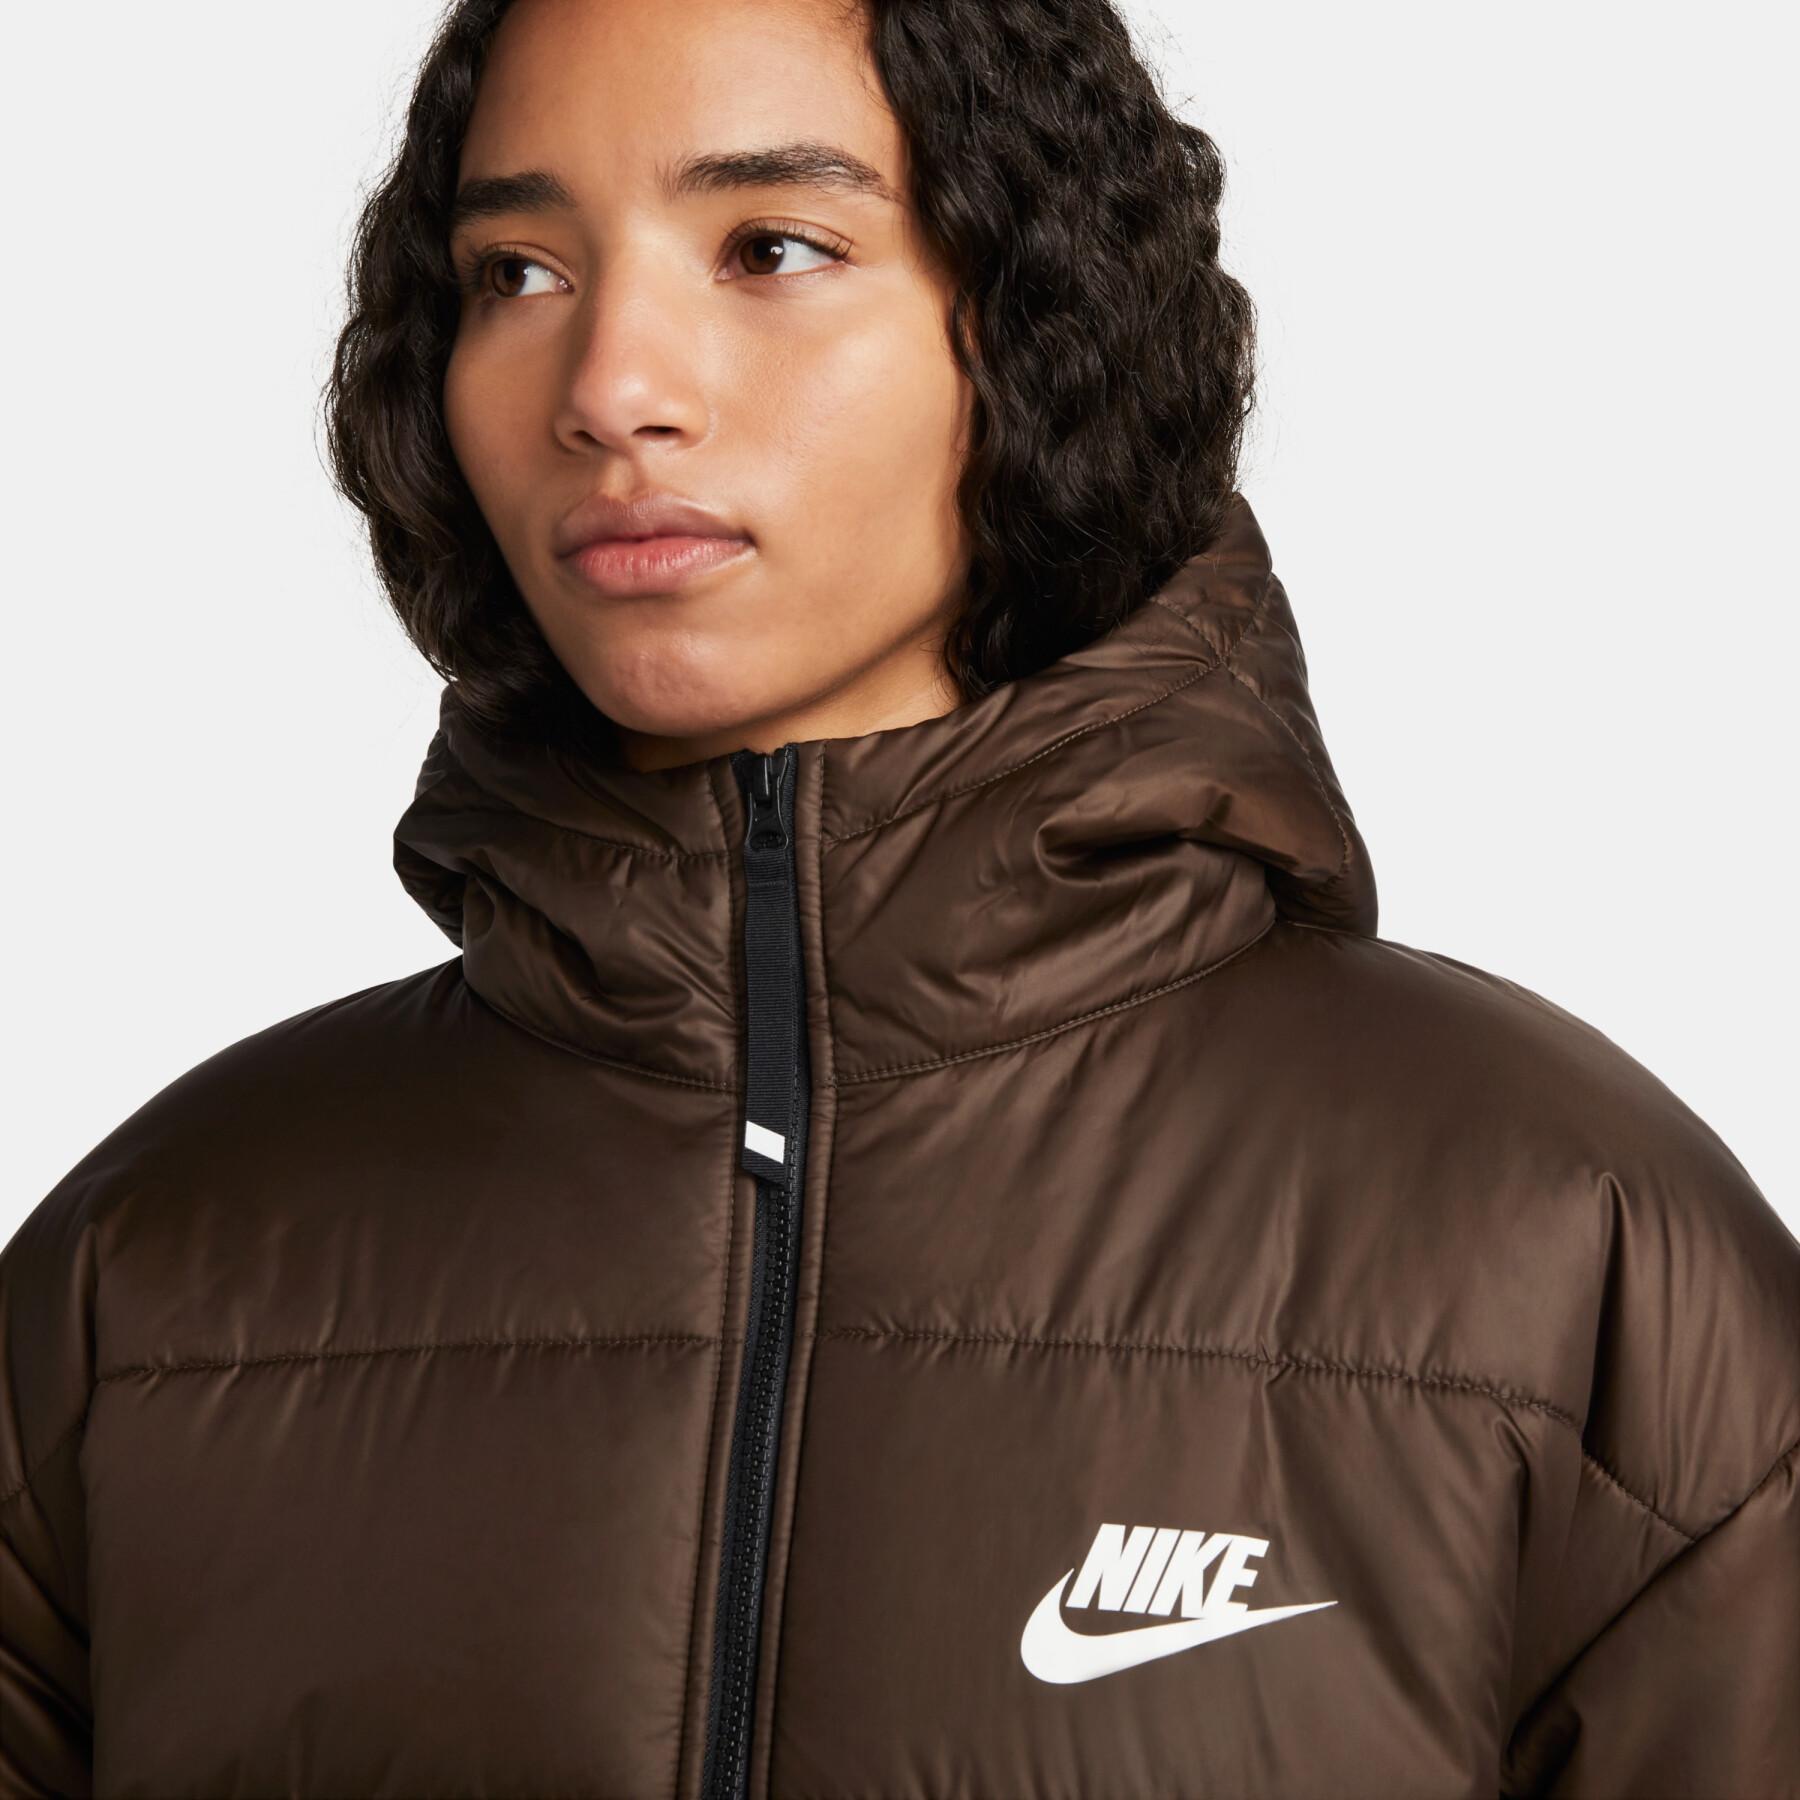 NWT Women's NIKE Sportswear Therma-FIT Repel City Jacket DX1797-237 Brown